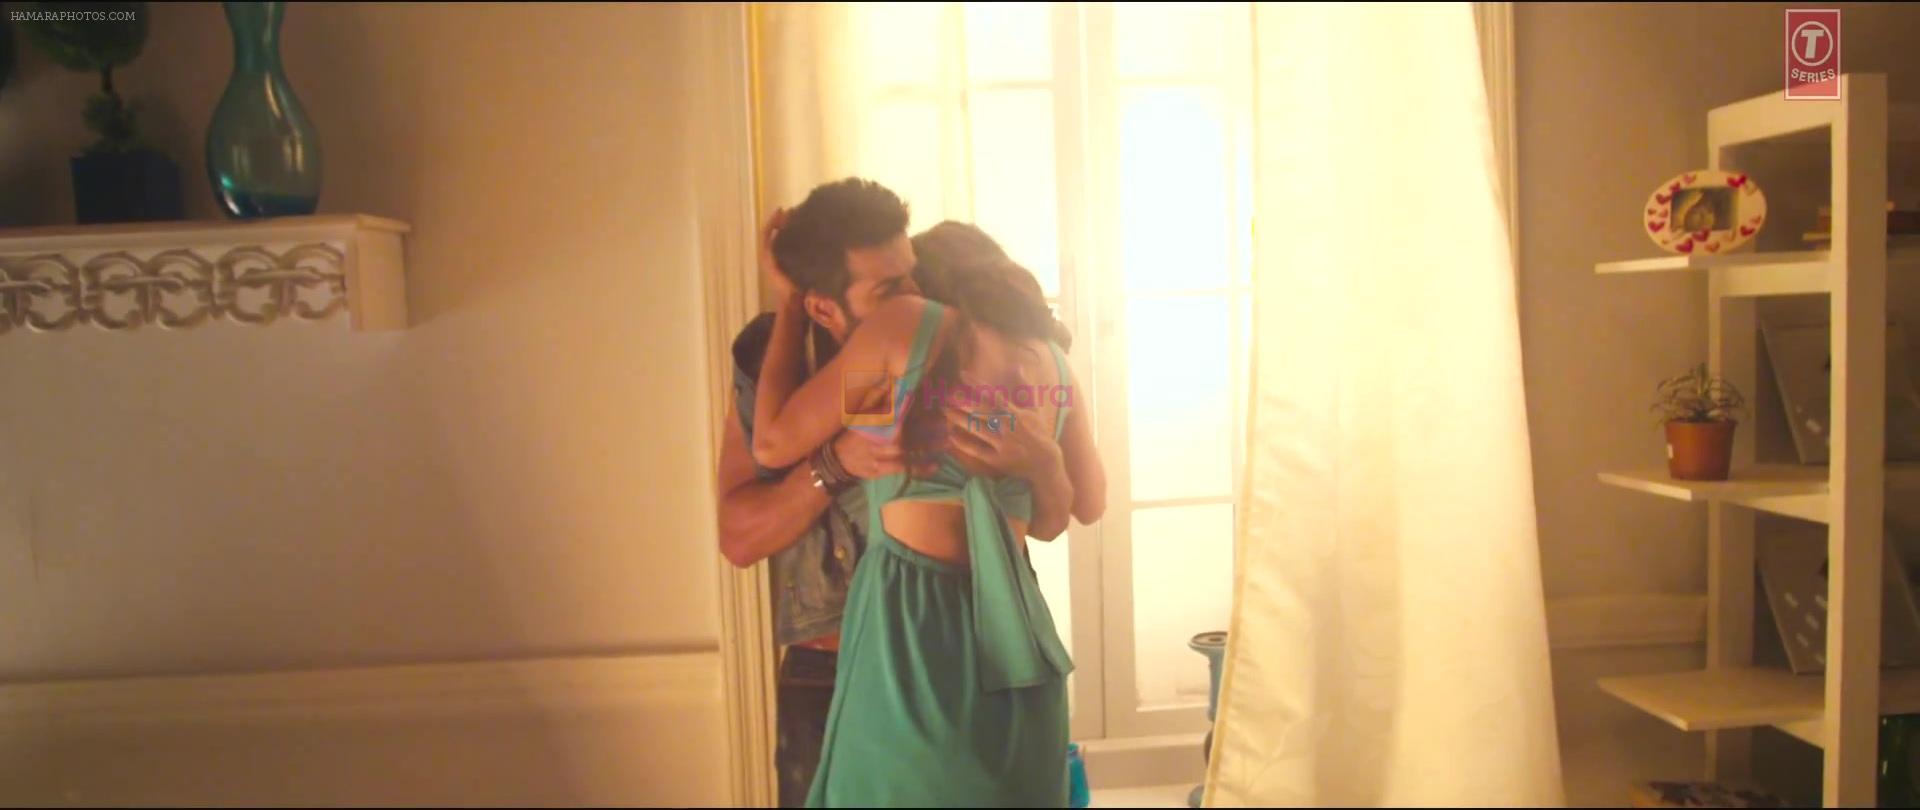 Jay Bhanushali and Surveen Chawla in the still from movie Hate Story 2